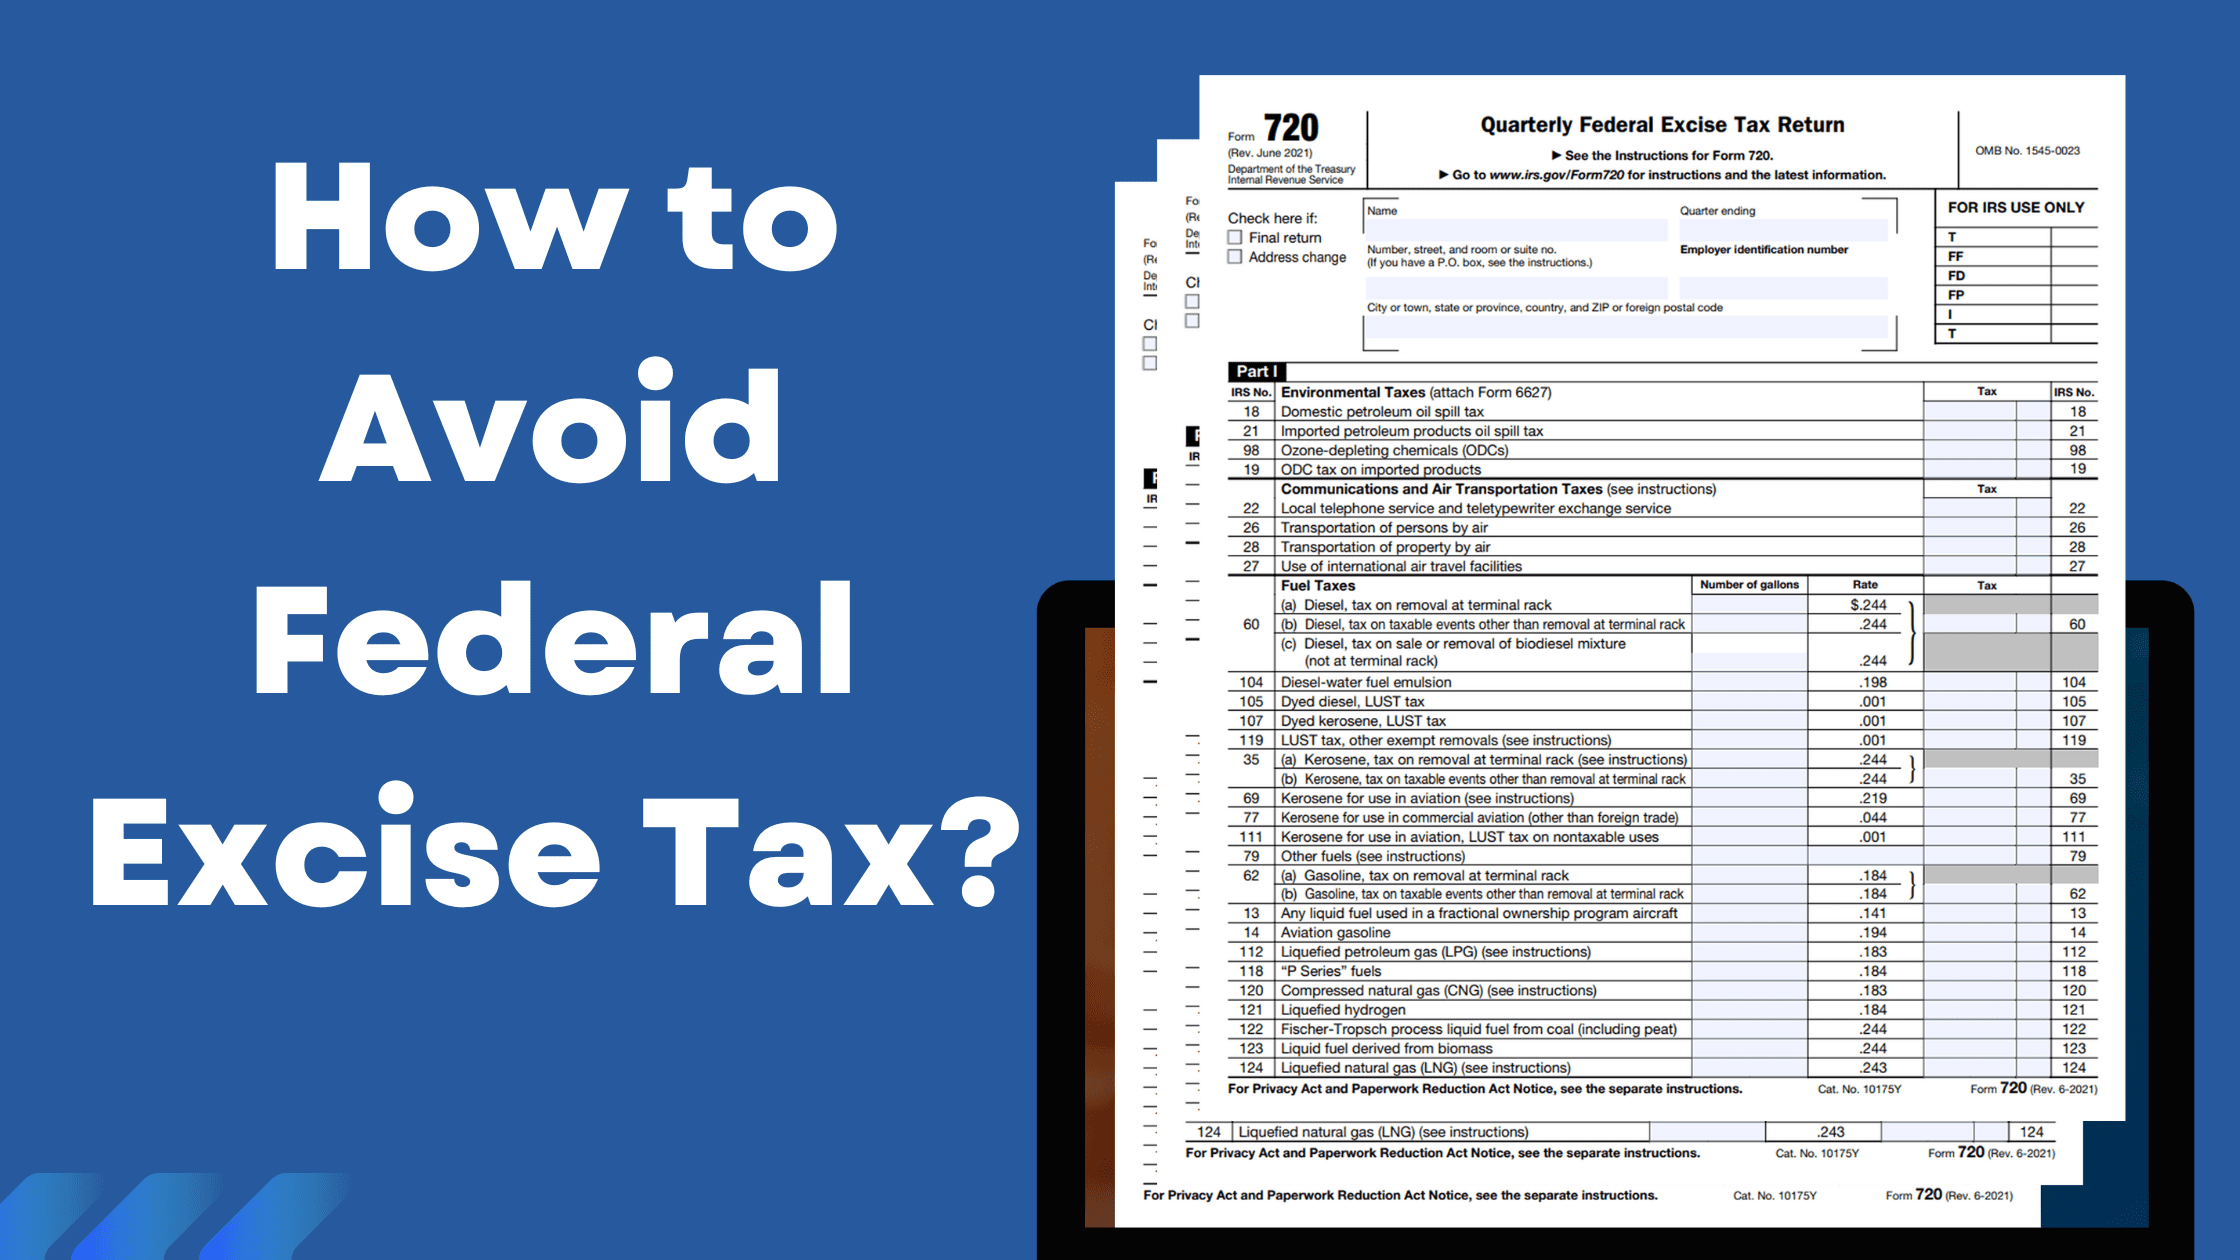 4 Ways to Avoid Federal Excise Tax for Your Business